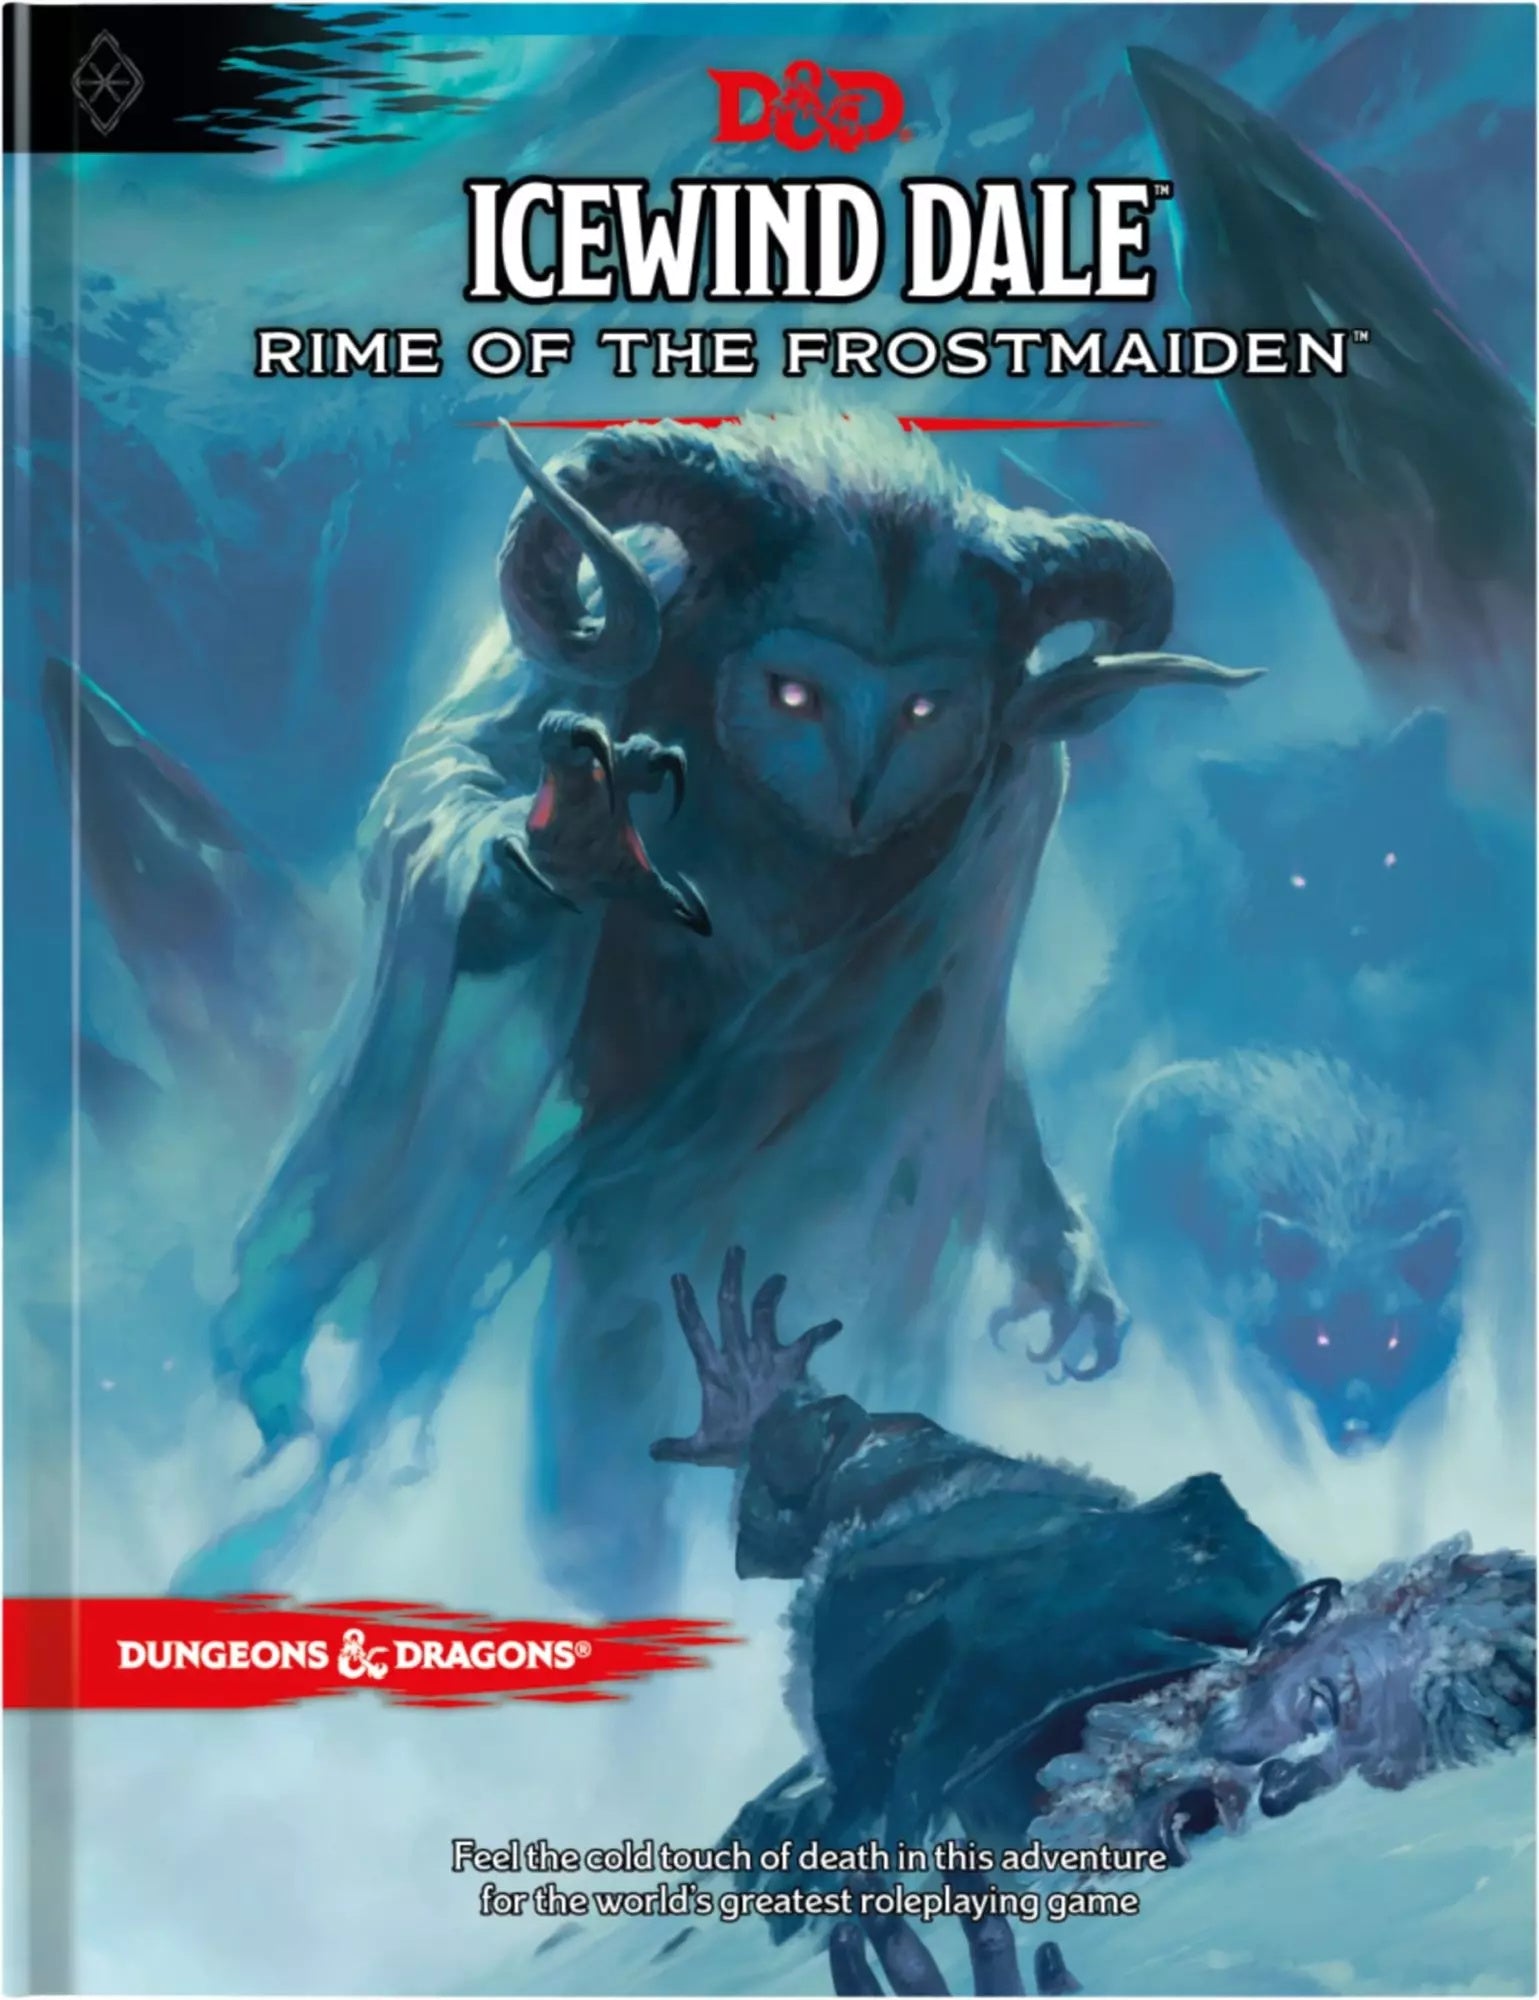 D&D Icewind Dale Rime of the Frostmaiden 5th Ed